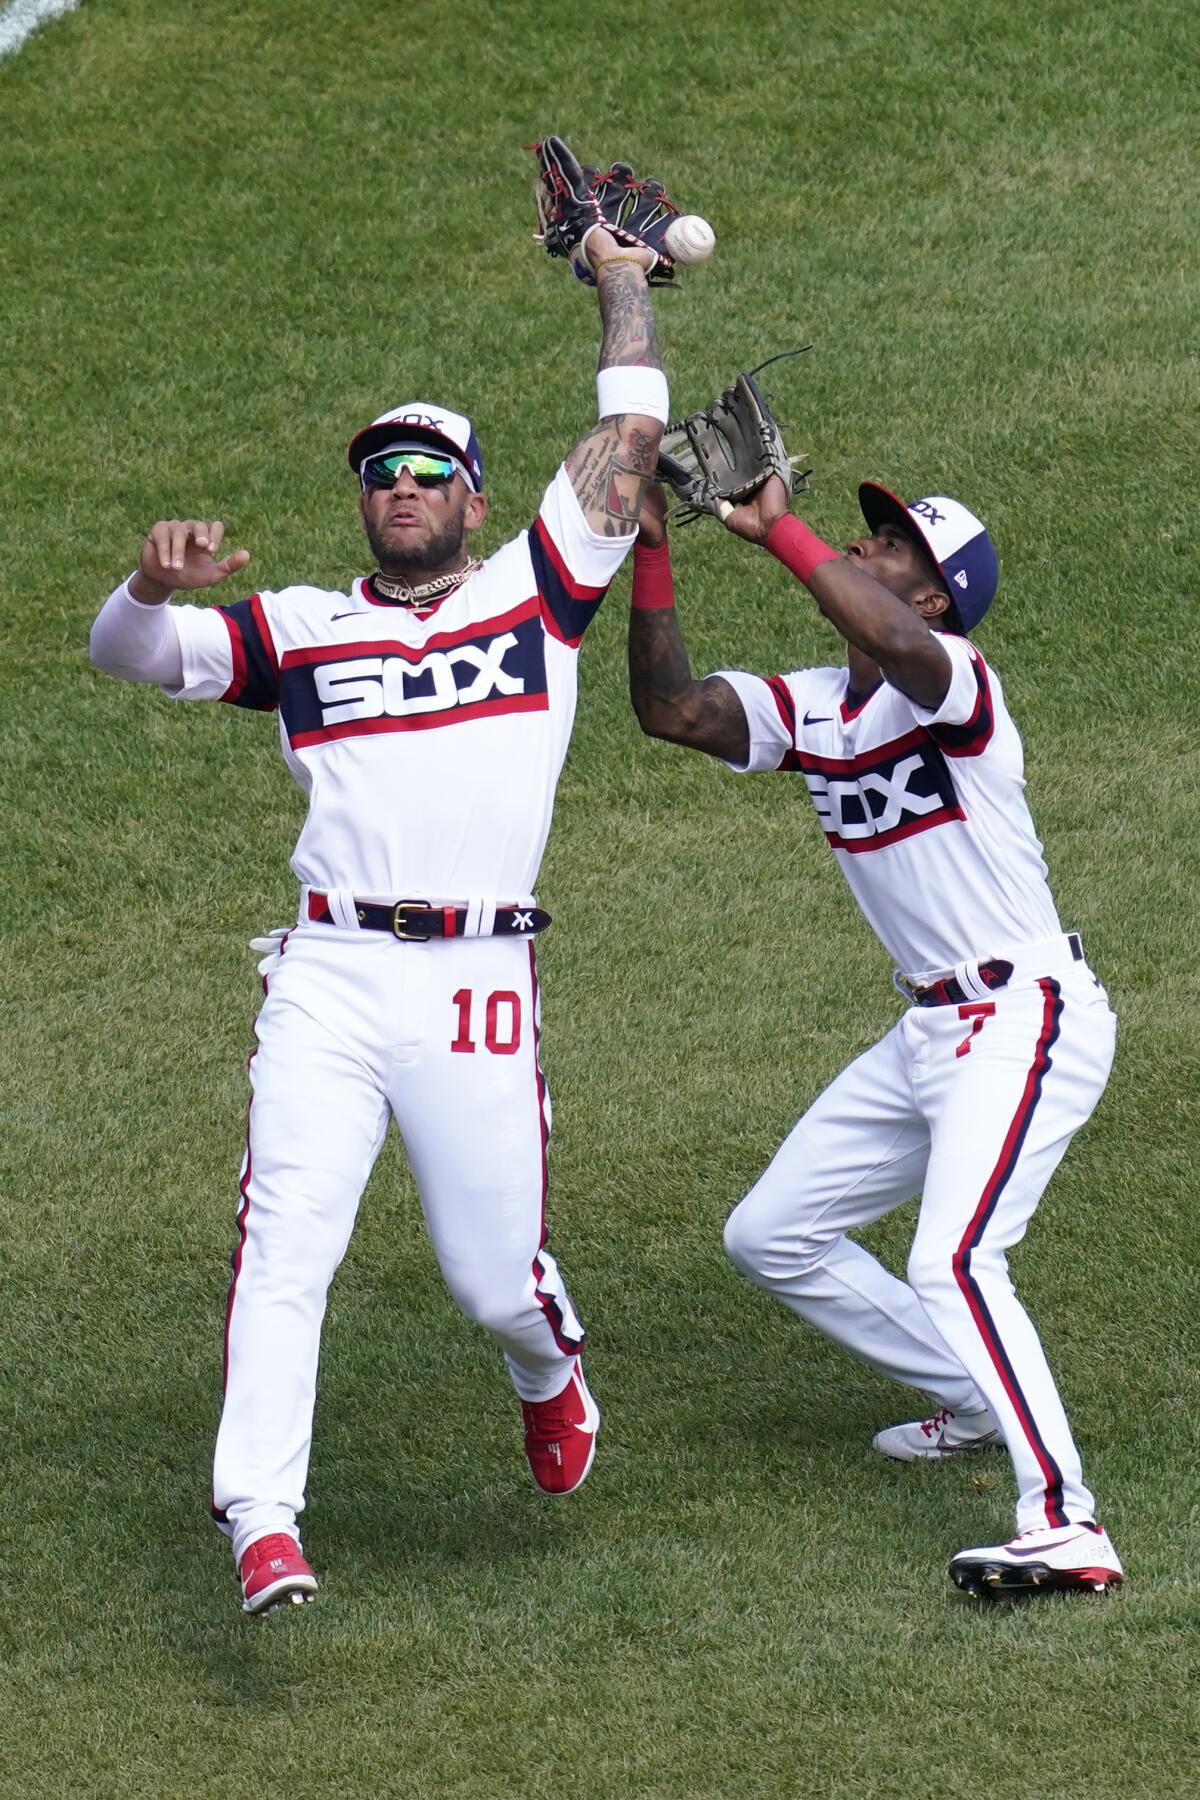 Chicago White Sox third baseman Yoan Moncada, left, makes a fielding error as teammate Tim Anderson, right, watches the ball during the fourth inning of a baseball game in Chicago, Sunday, May 2, 2021. (AP Photo/Nam Y. Huh)